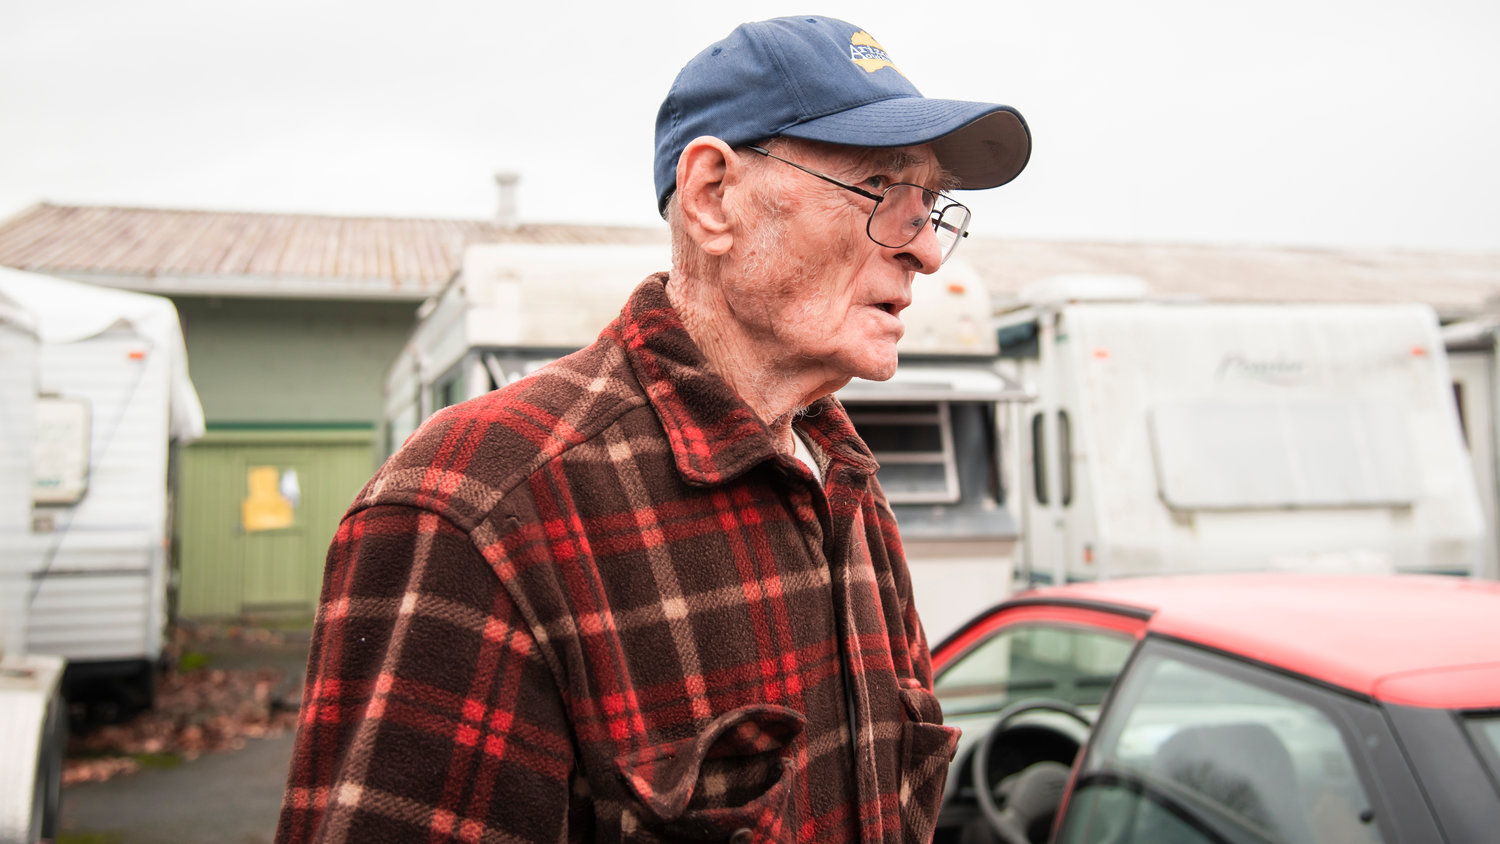 Willard Gabbard, 85, talks about living in a trailer outside Yard Birds for the past 12 years after his retirement and how he wants to stay, describing a six-month waitlist for other trailer parks.